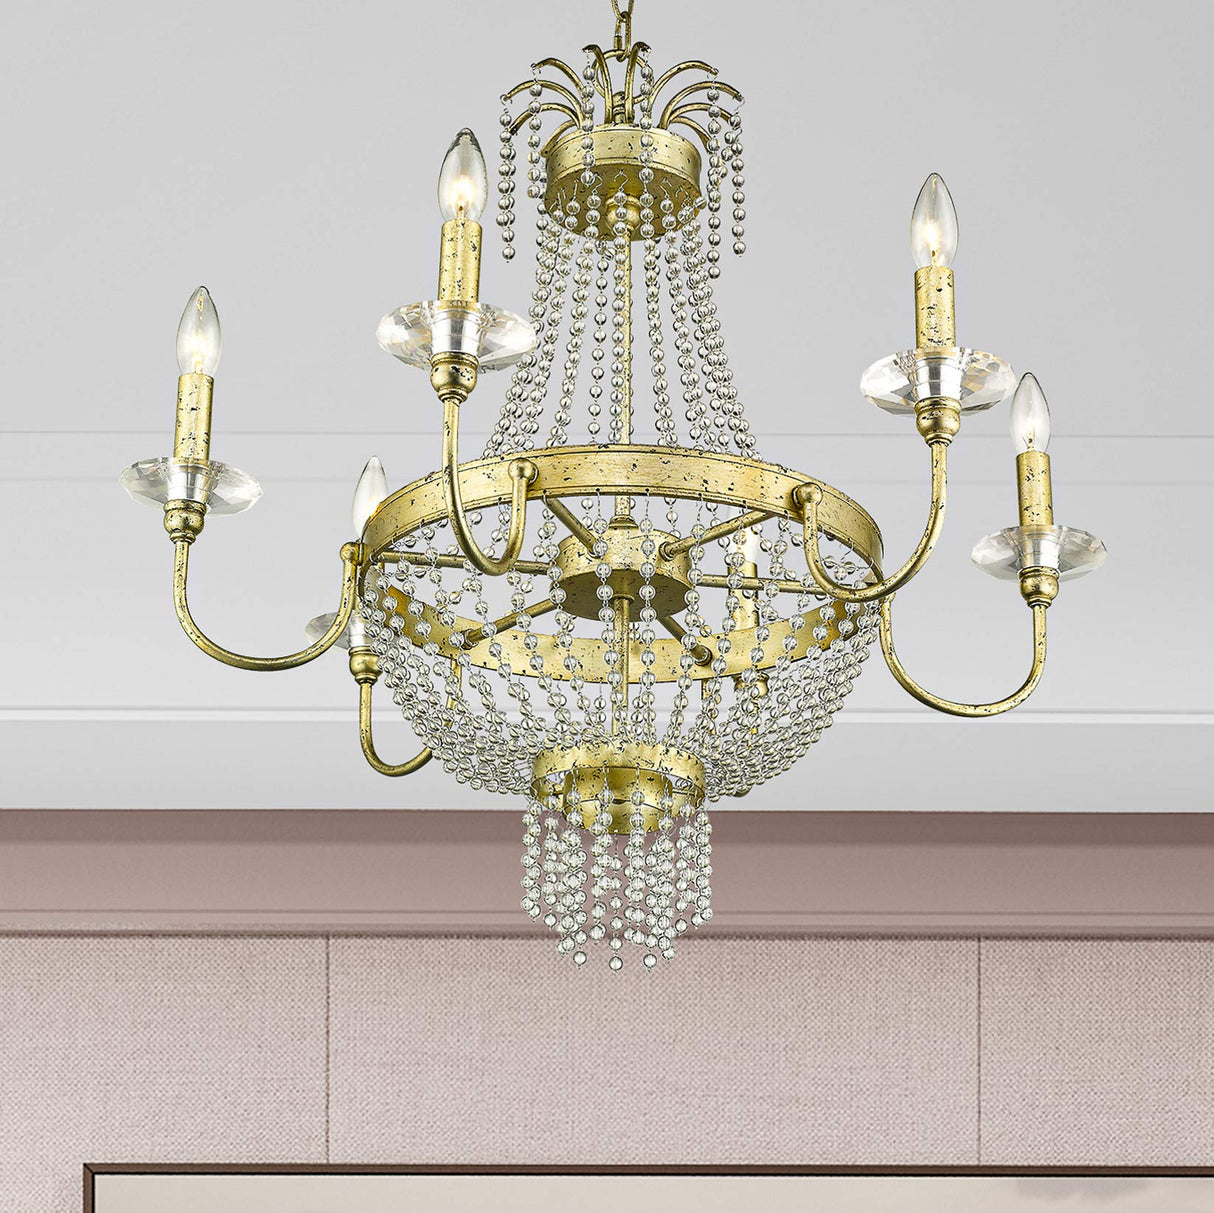 Livex Lighting 51846-28 Crystal Six Light Chandelier from Valentina Collection, Champ, Gld Leaf Finish, Hand Applied Winter Gold